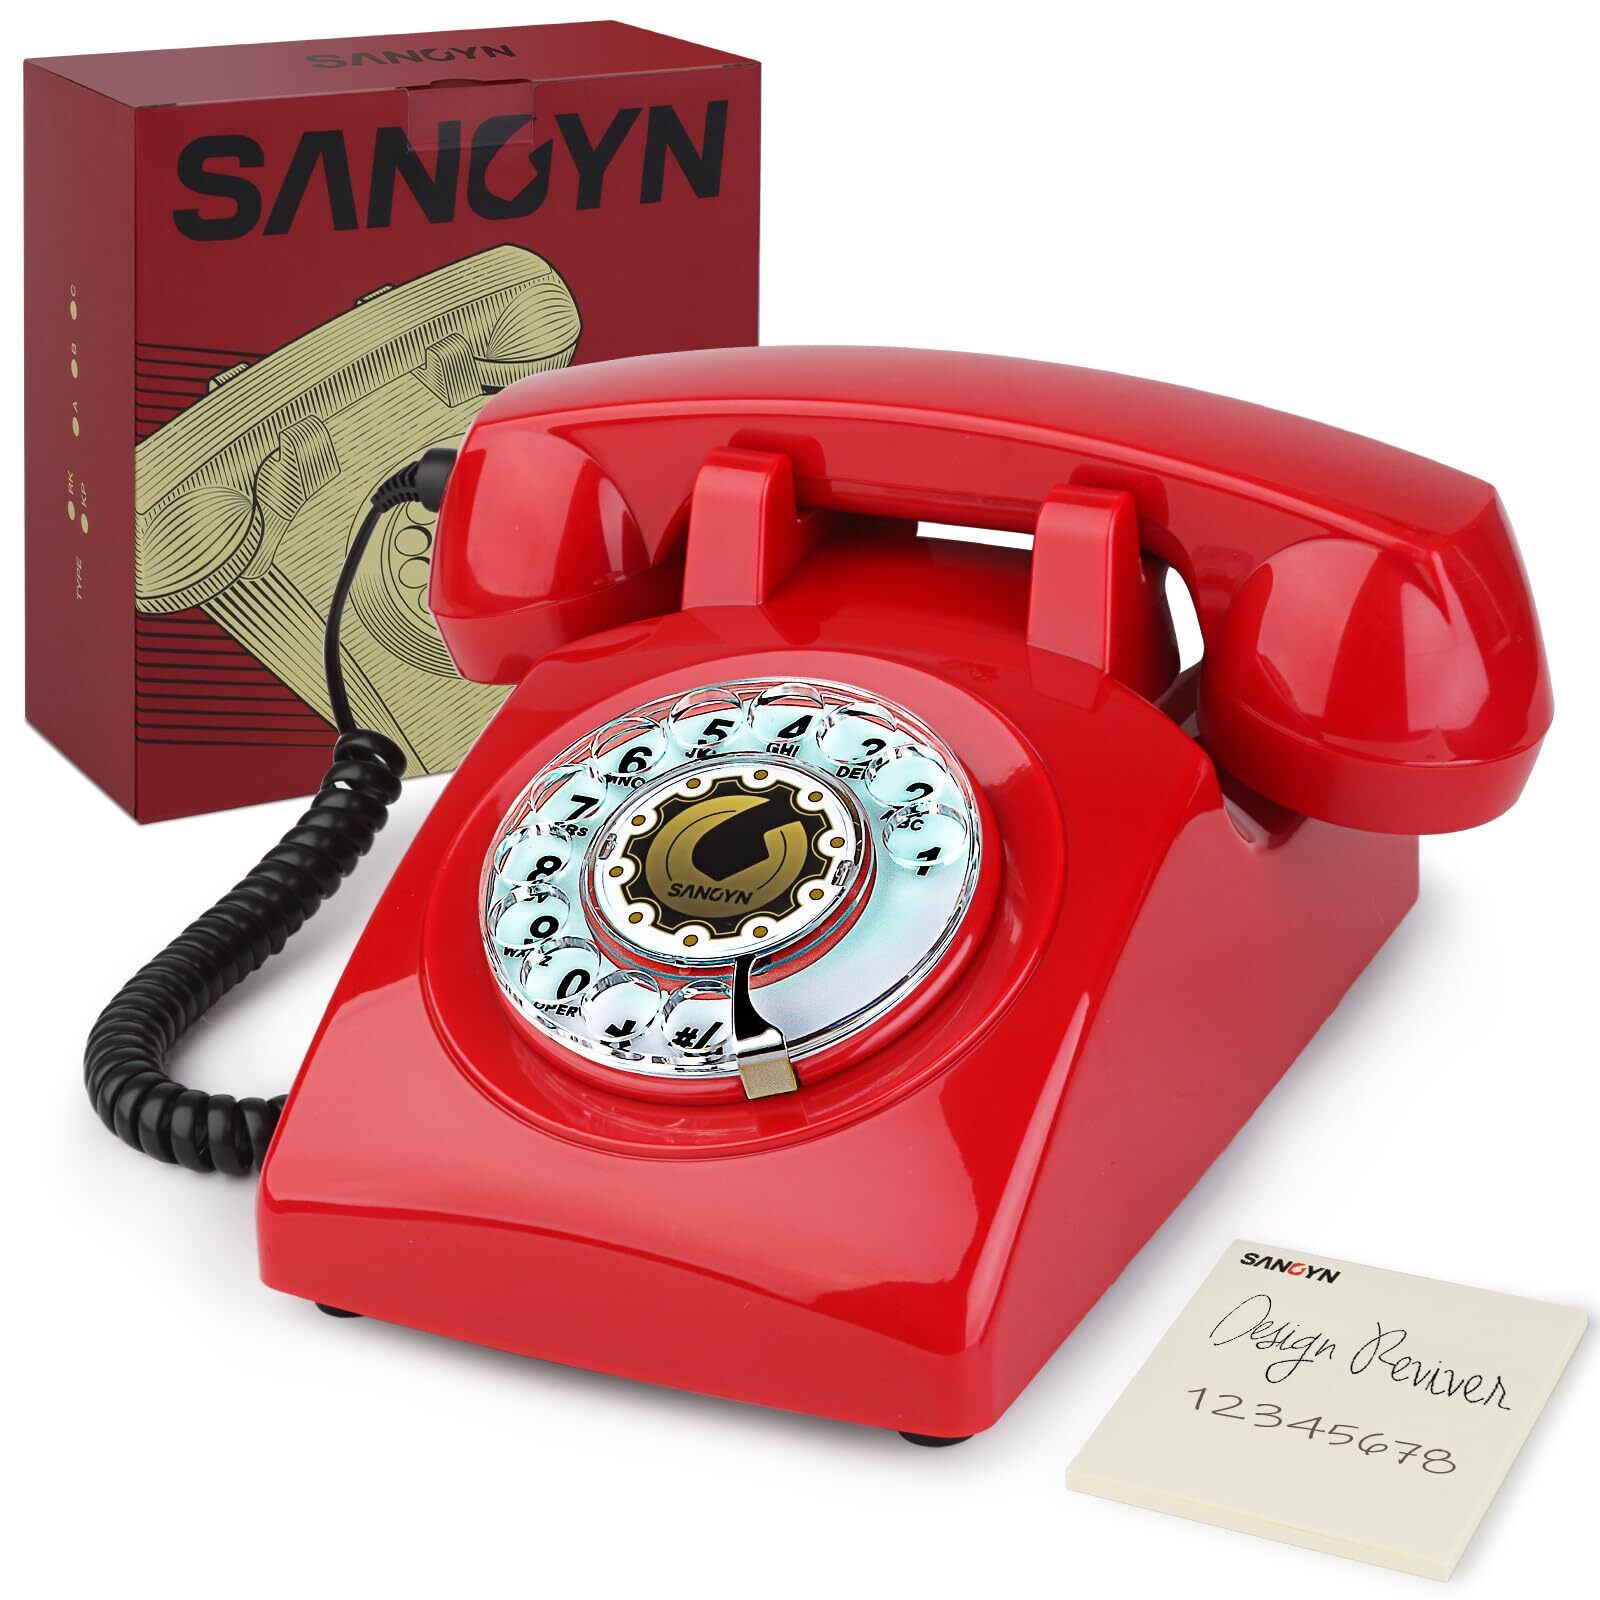 1960s Classic Old Style Rotary Phone Vintage Telephone for Landline with Mechan